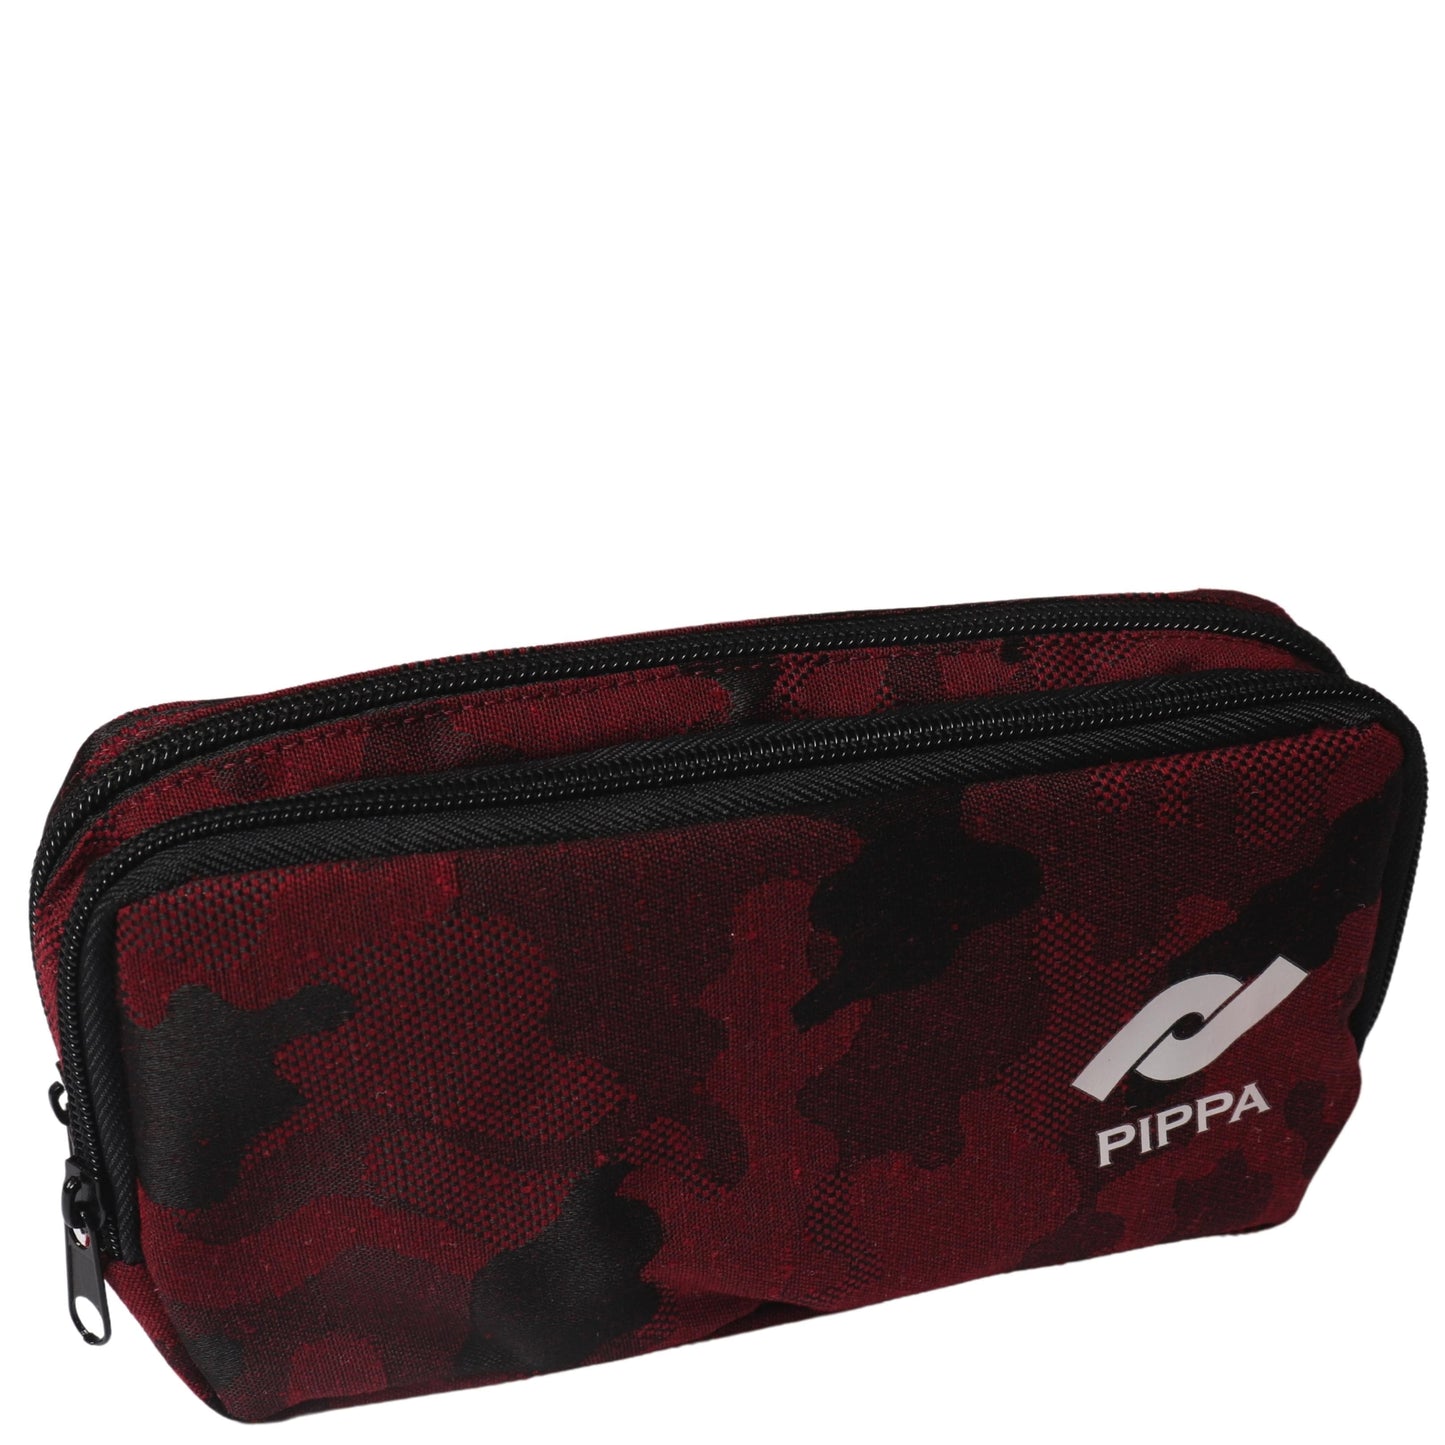 PIPPA School Bags & Supplies Red PIPPA - Pencil Case 2 Zippers